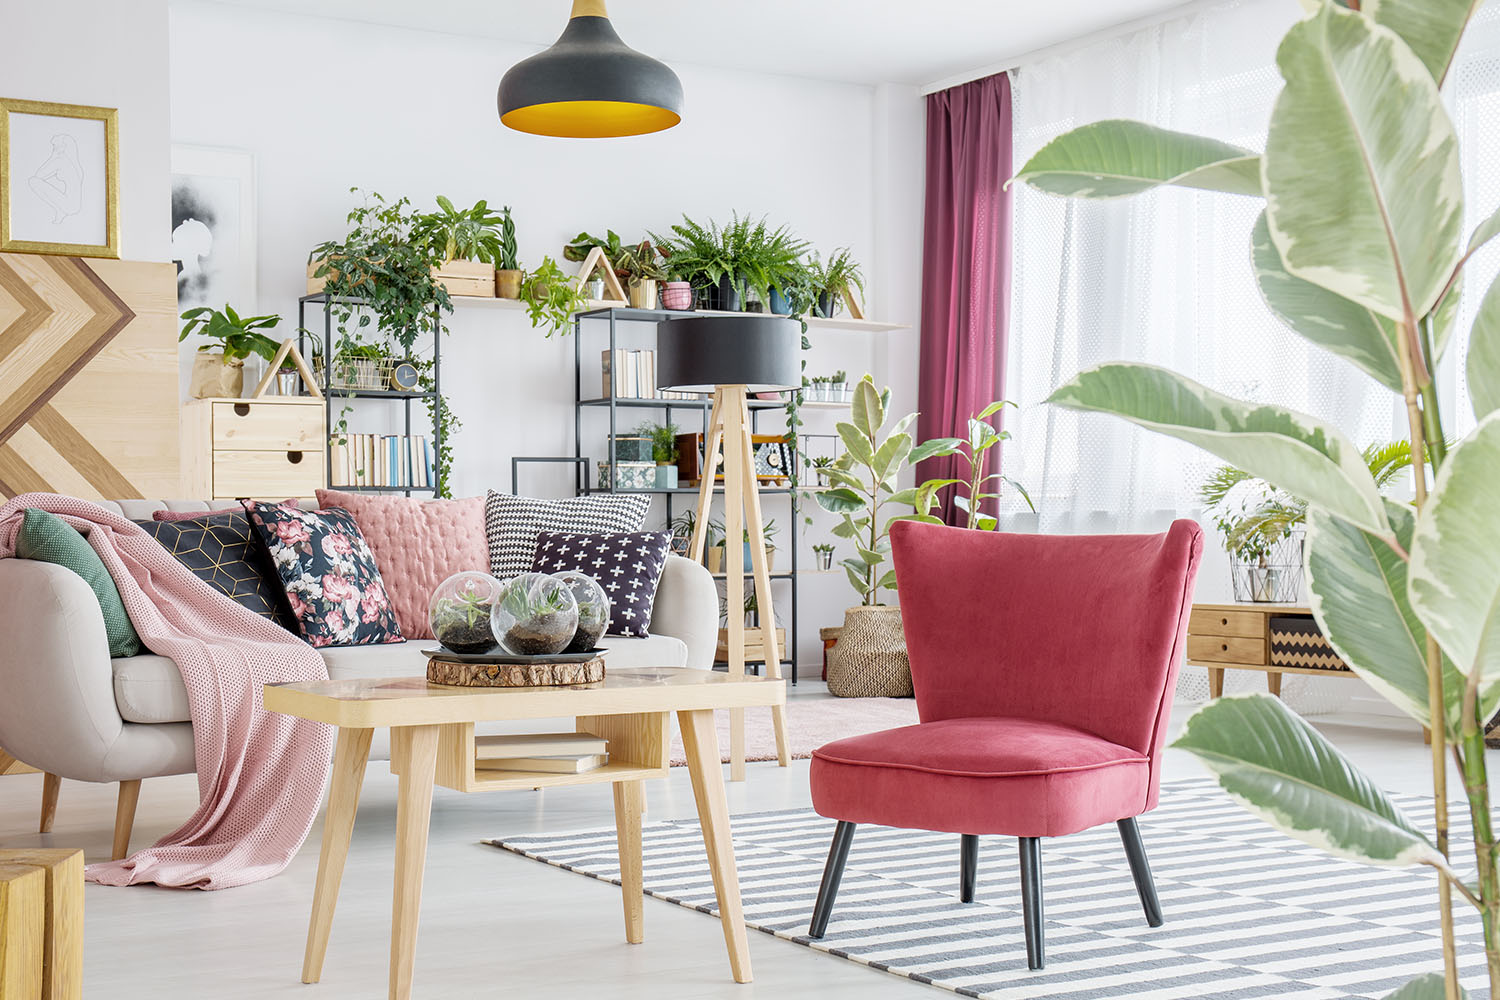 These 3 trends will be taking over interiors in 2019 | Better Homes and Gardens on Garden Designs 2019
 id=34258